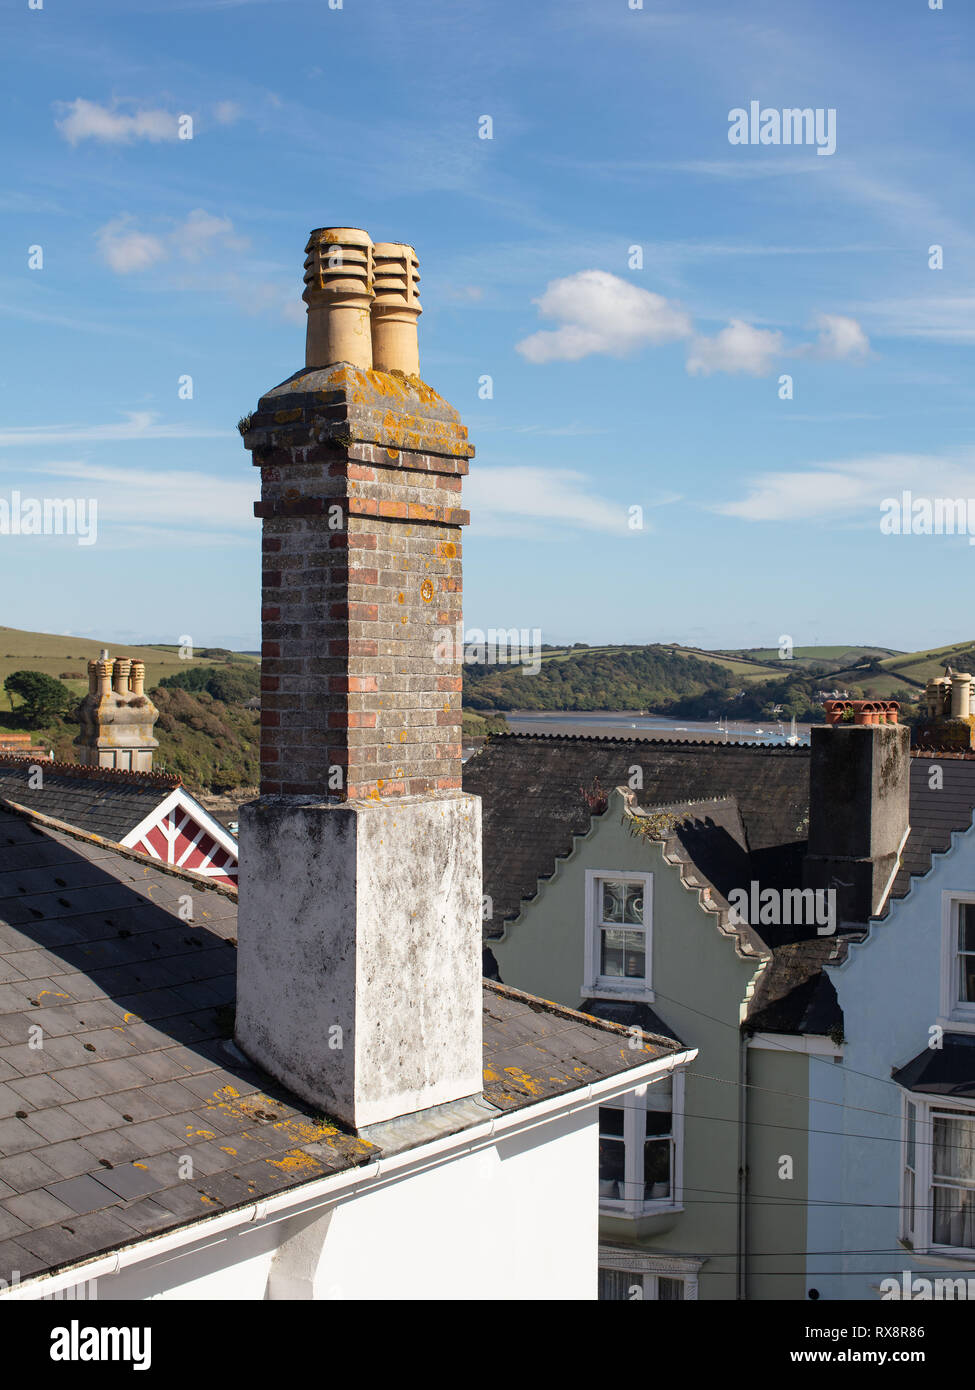 The Chimney stack in Salcombe with a great view over the estuary. Stock Photo